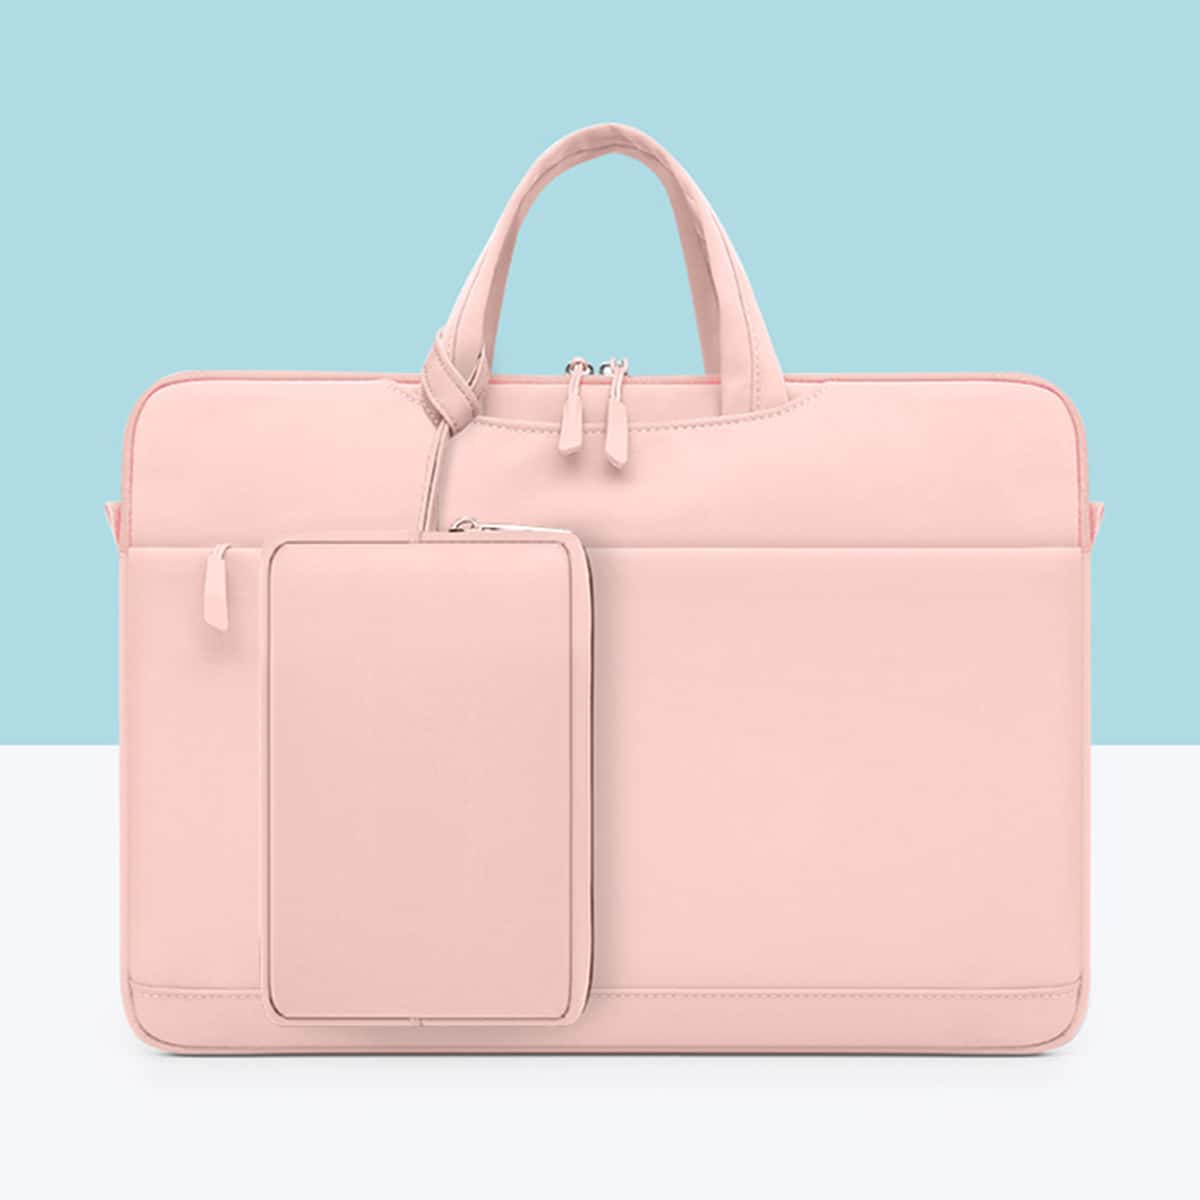 SHEIN 1pc Minimalist Laptop Bag With Accessory Pouch Pink 13 to 13.9 Inches,14 to 14.9 Inches,15 to 15.9 Inches